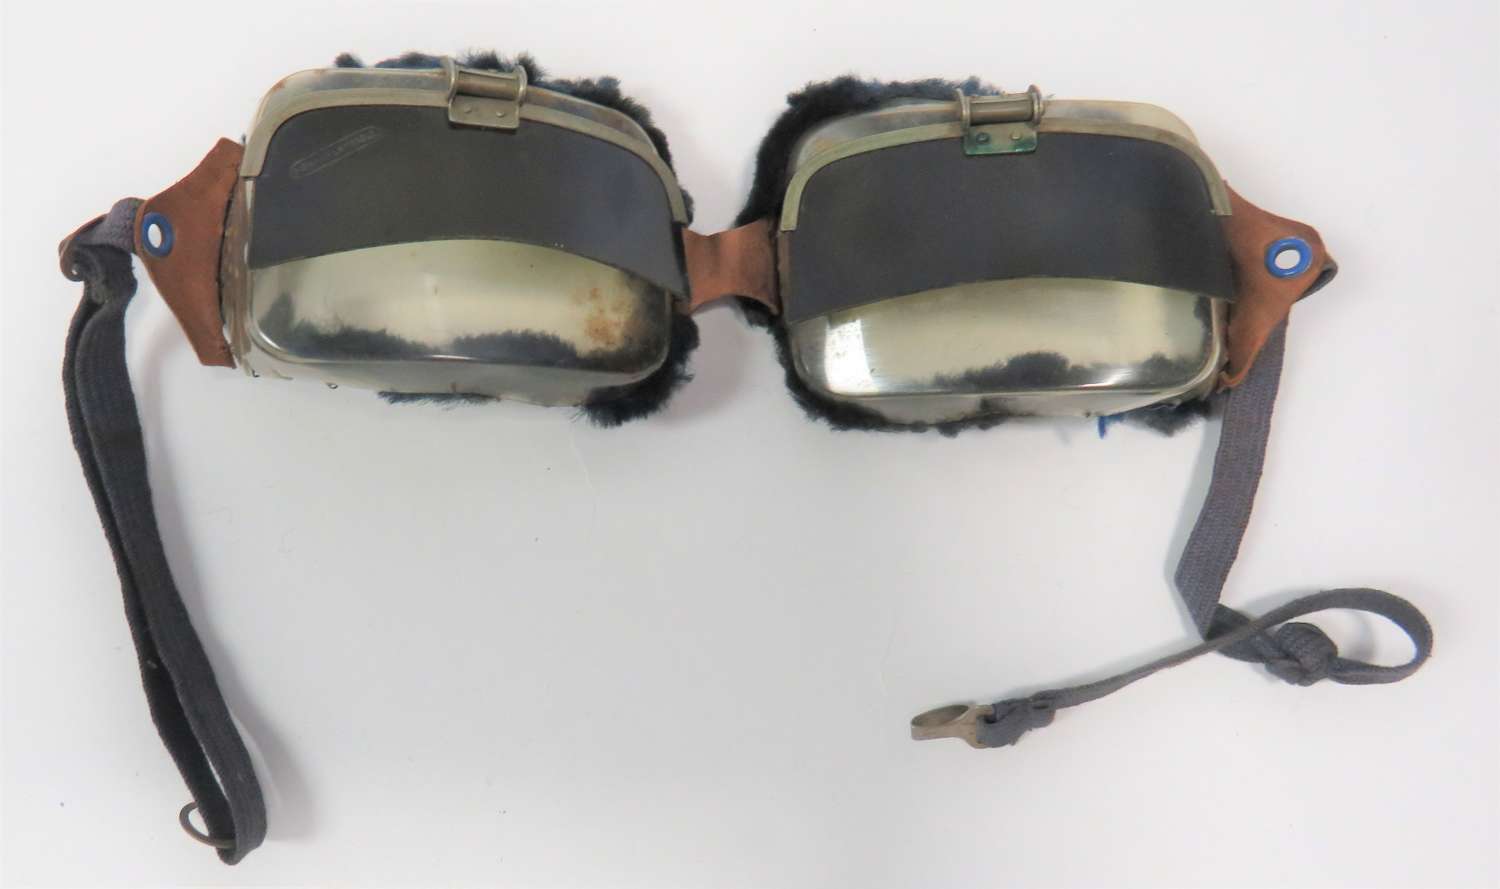 Scarce Pair of Interwar Flying Goggles with Fold Down Tinted Lenses